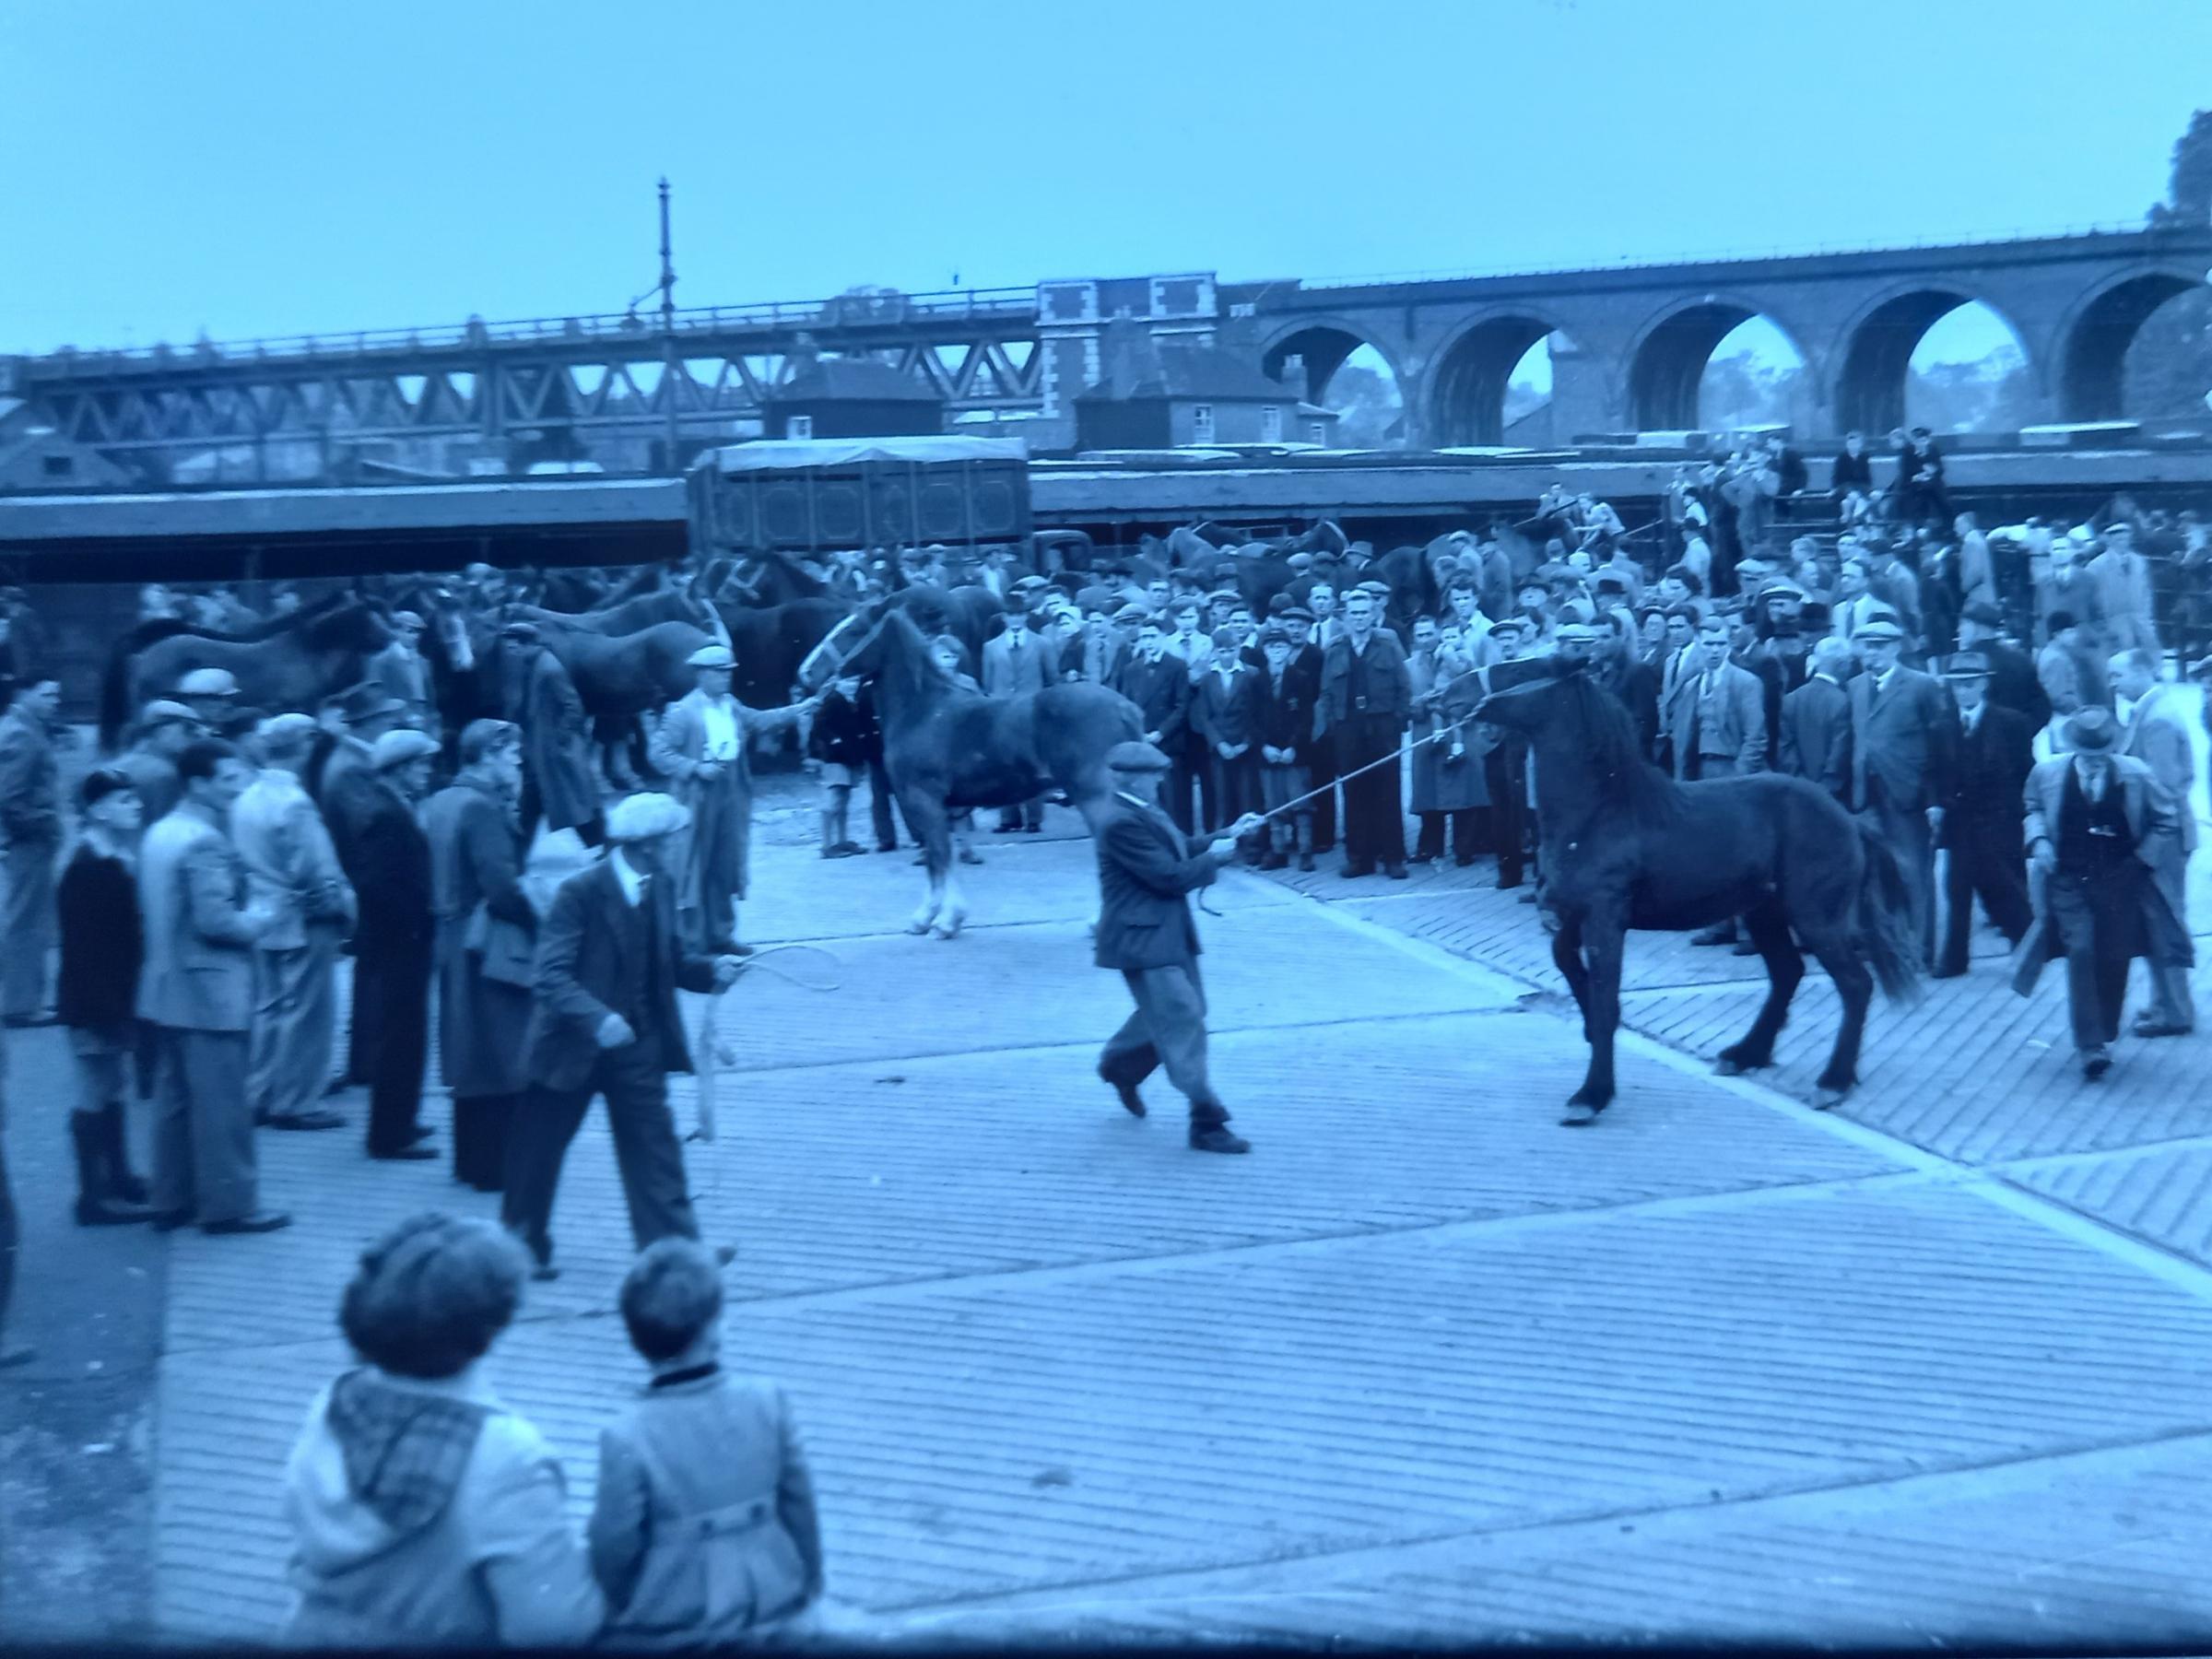 Sale of horses at Worcester Cattle Market in 1953 during the Hop, Cheese and Sheep Fair